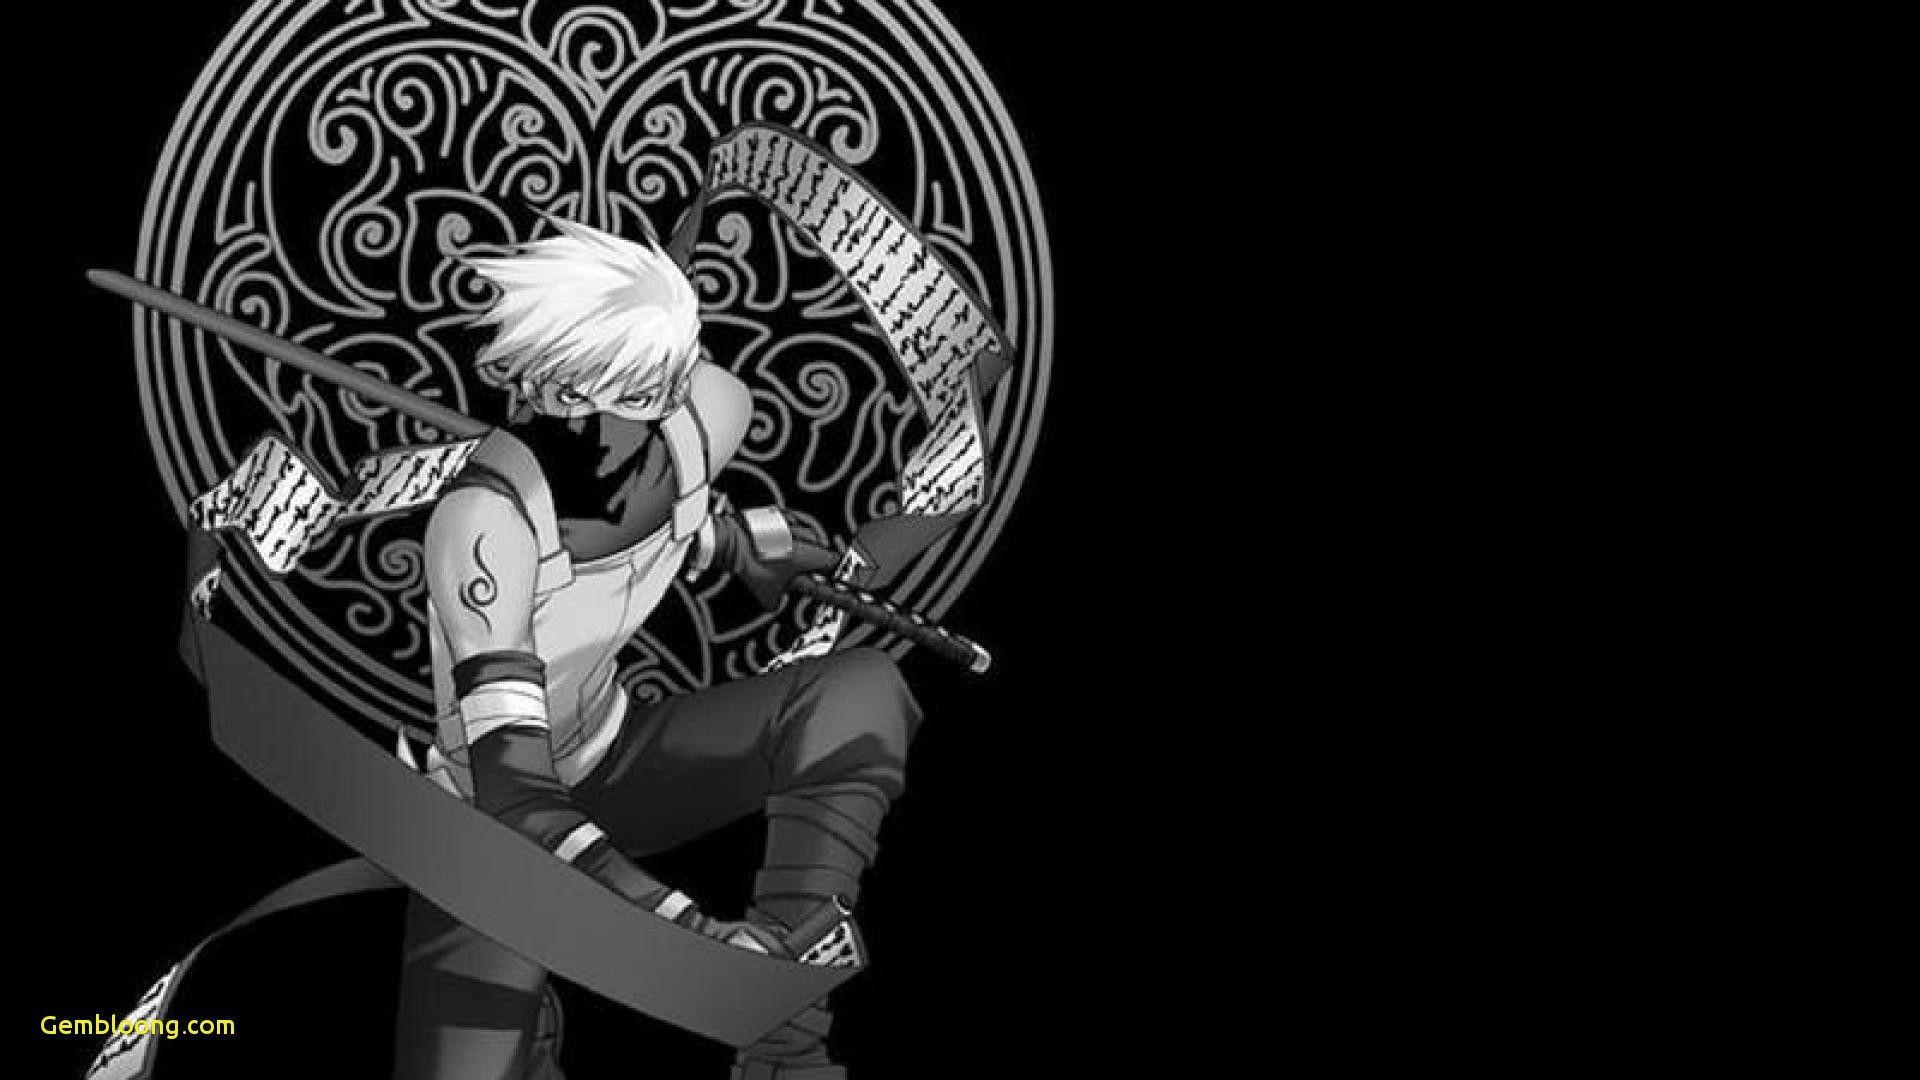 Black and White Naruto Wallpapers - Top Free Black and White Naruto